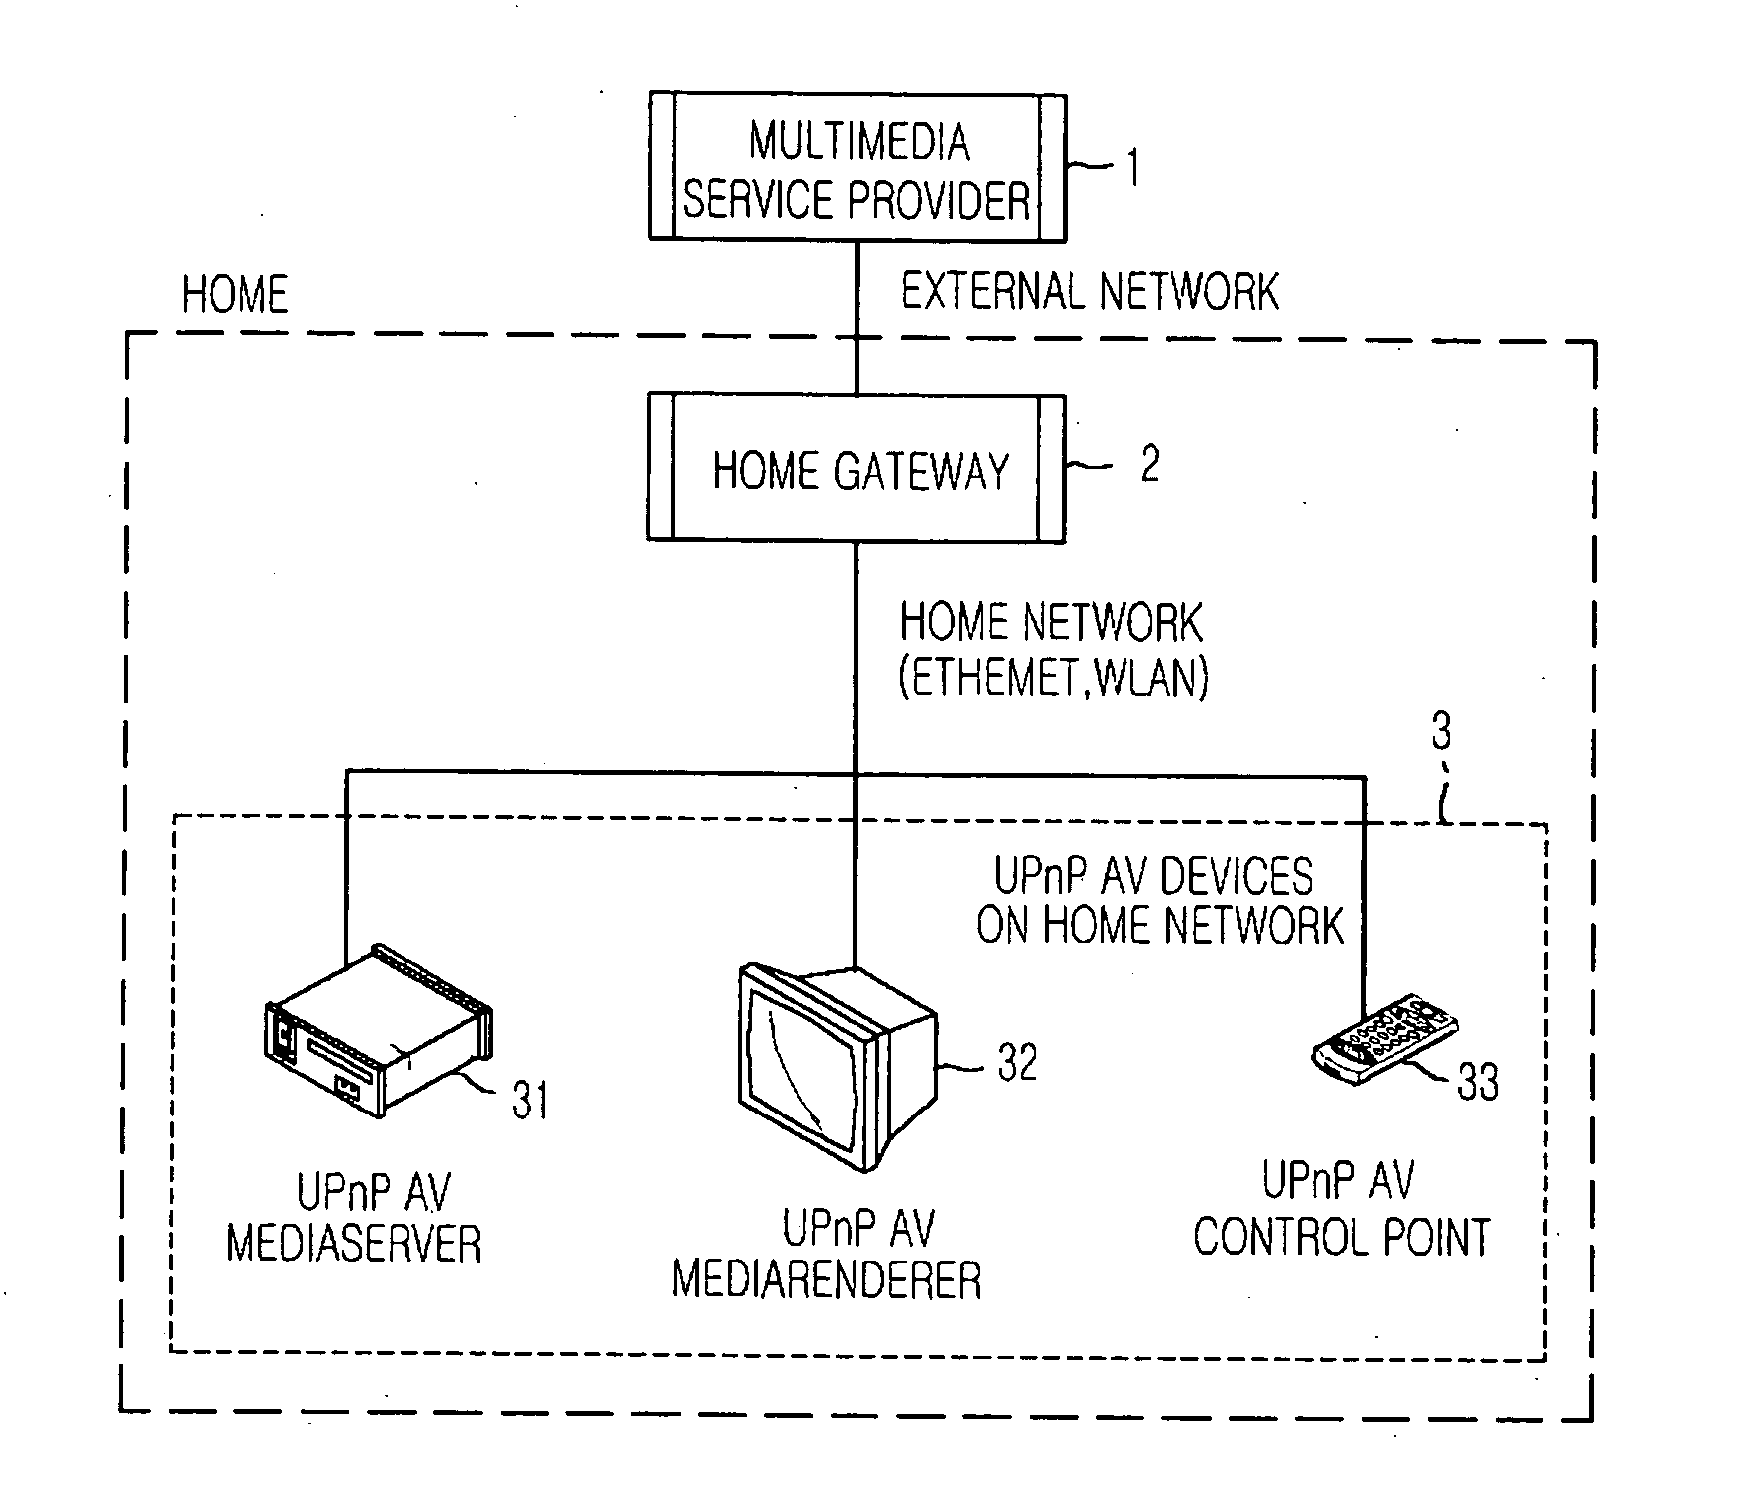 Multimedia service apparatus and method for multimedia service providers outside home to UPnP devices inside home using home gateway and service gateway platform